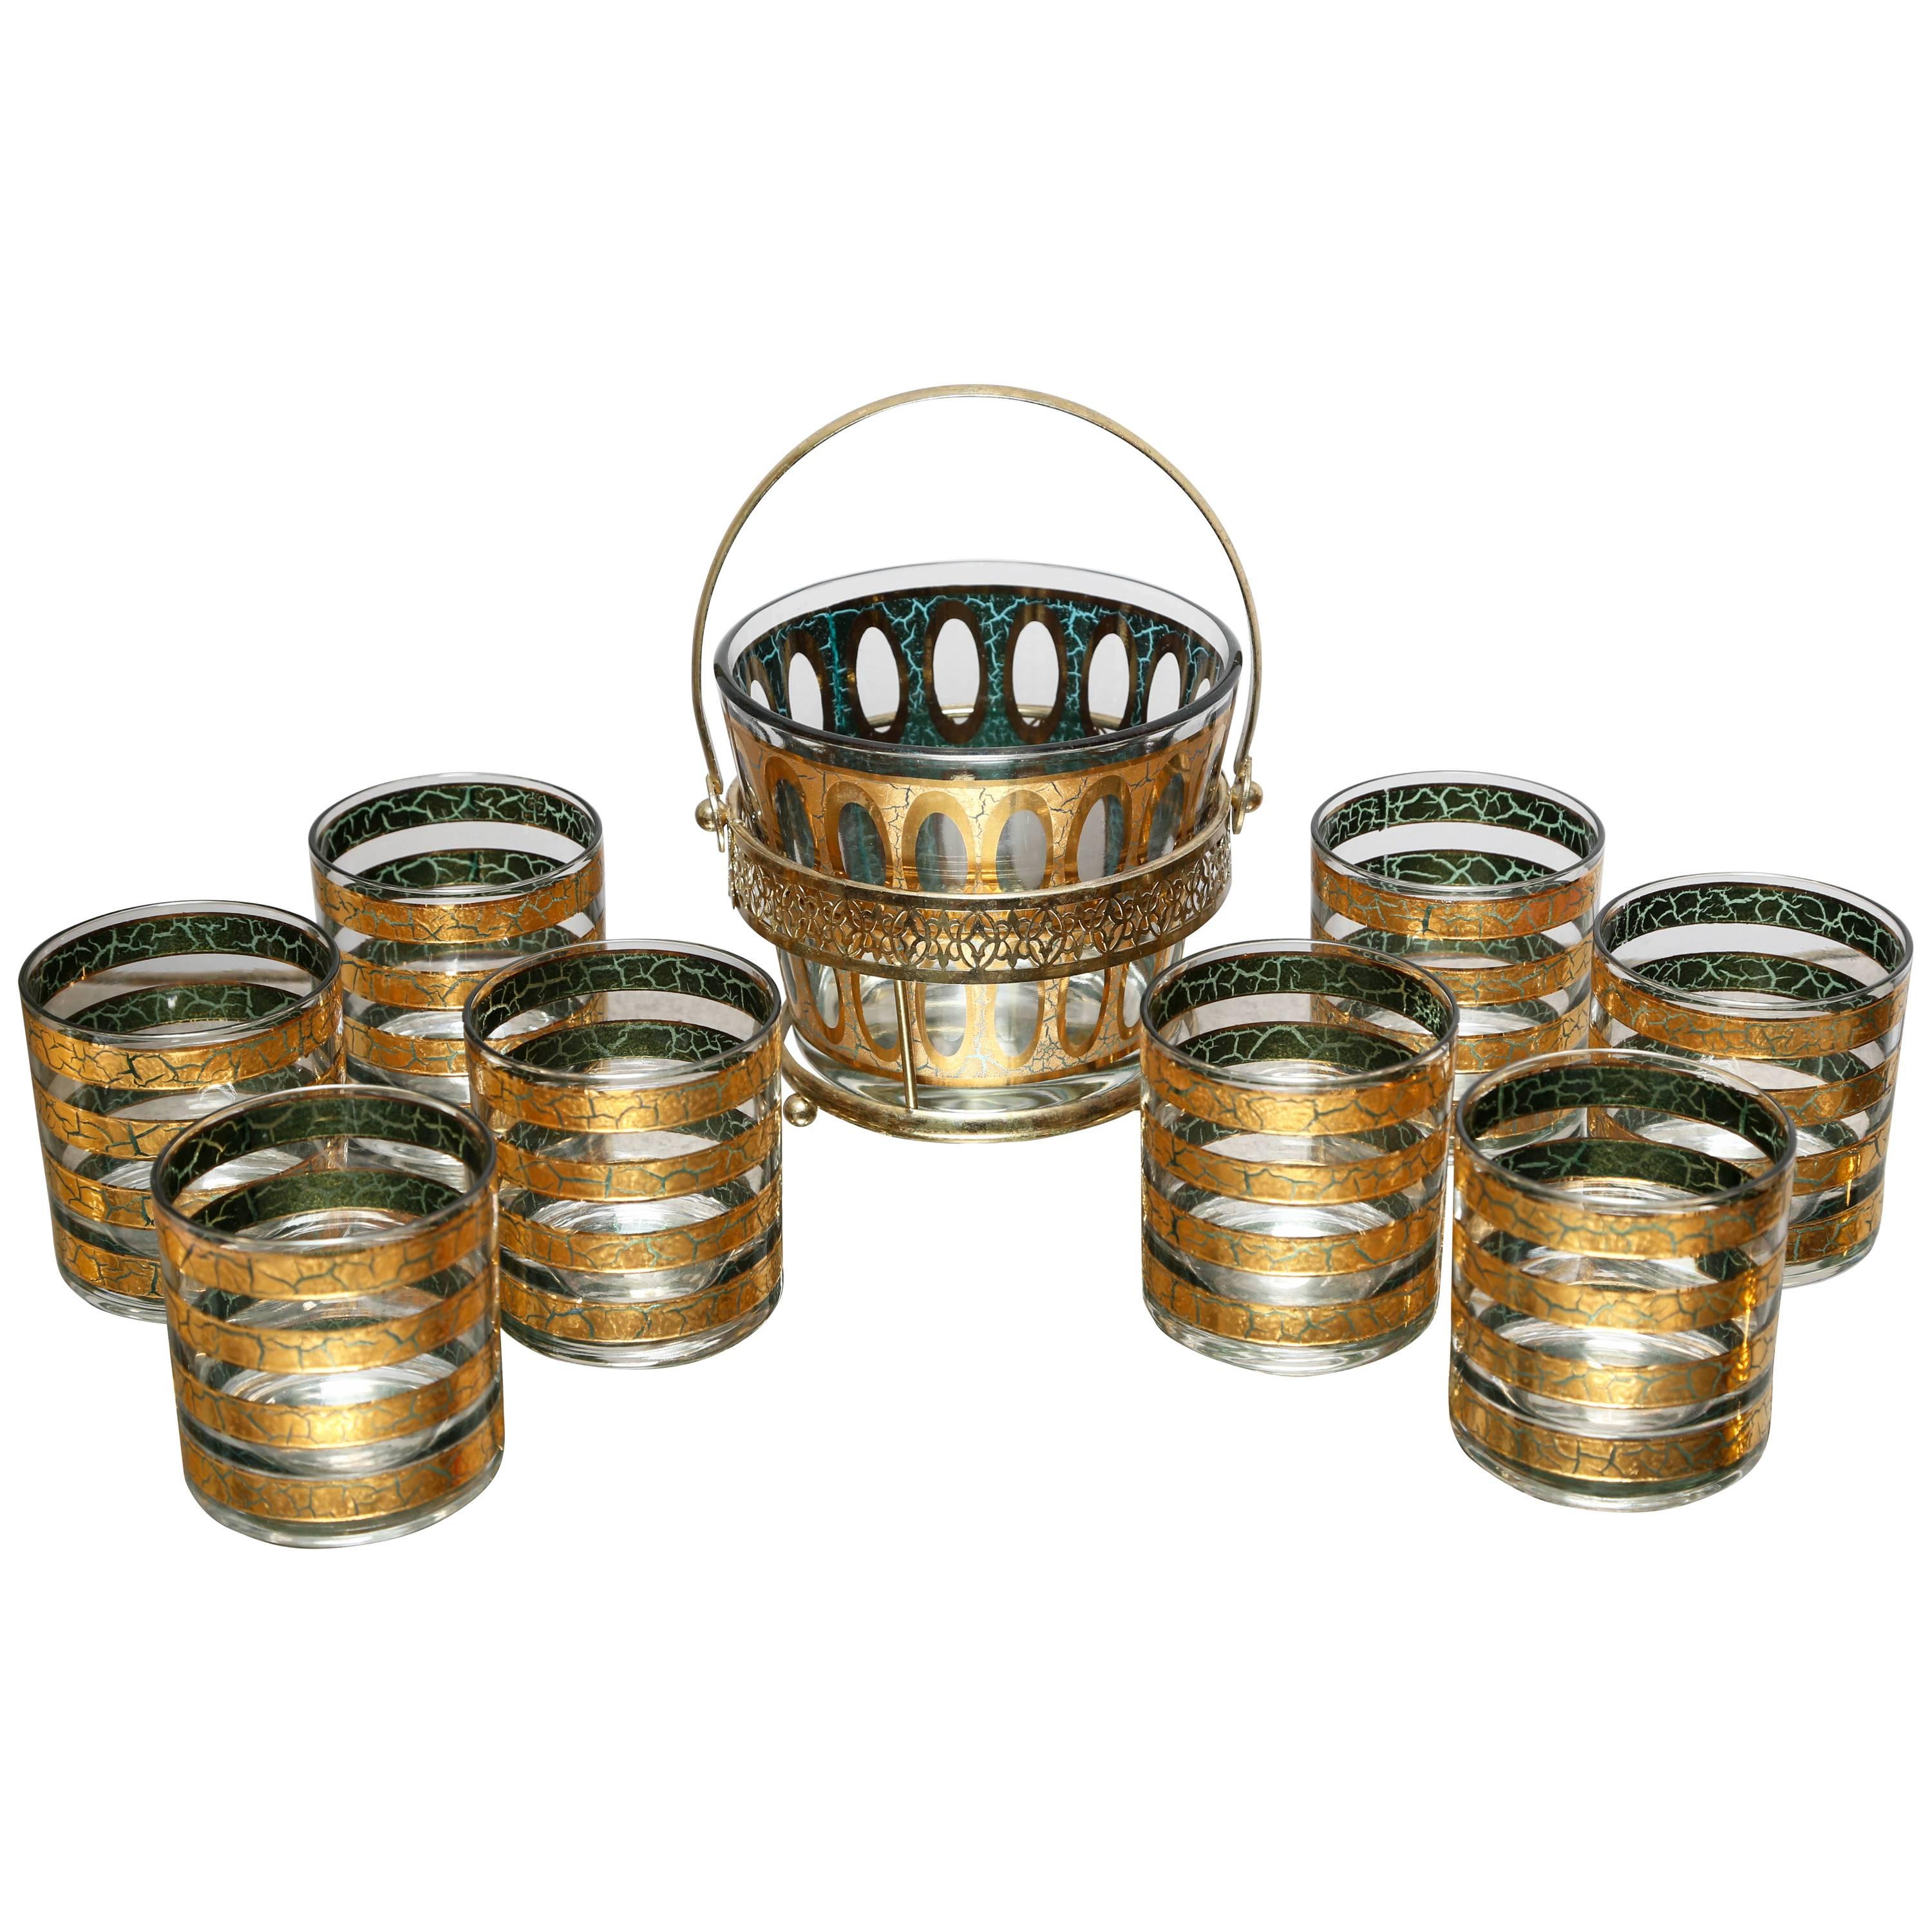  SALE! SALE!SALE! COCKTAIL SET with  Ice Bucket and Eight Tumblers, Rich Gilt  For Sale